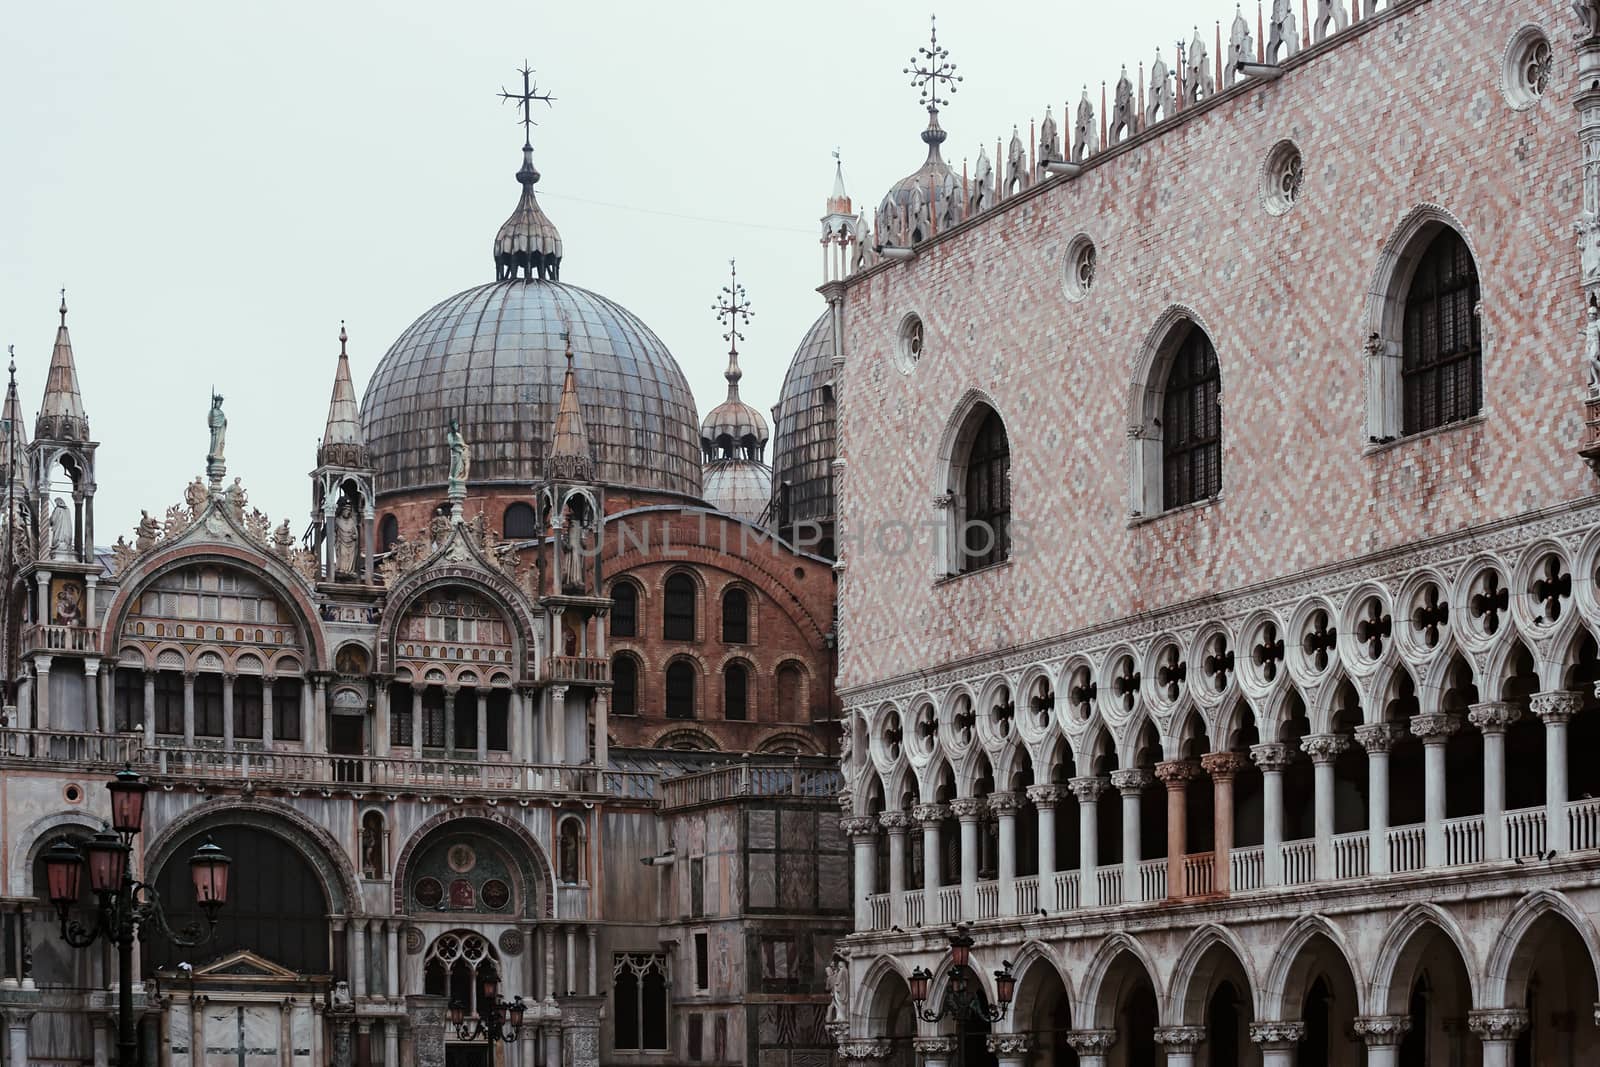 Photo of the architecture in Piazza San Marco in Venice Italy on a dreary day.